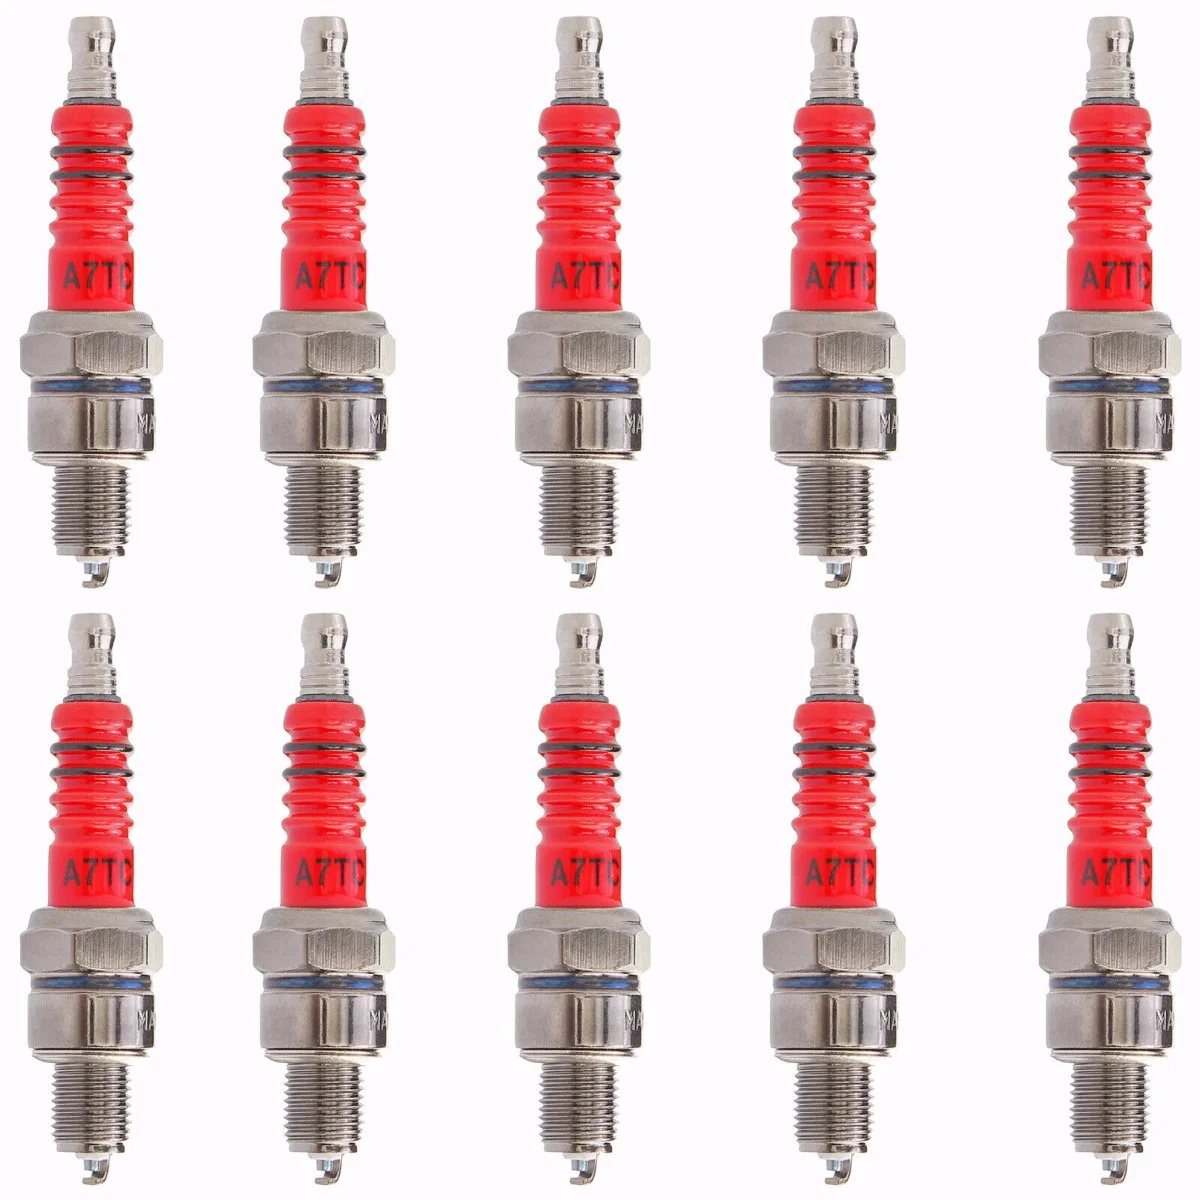 Wholesale Spare Parts Spark Plug for Motorcycle ATV Quad Scooter Go Kart